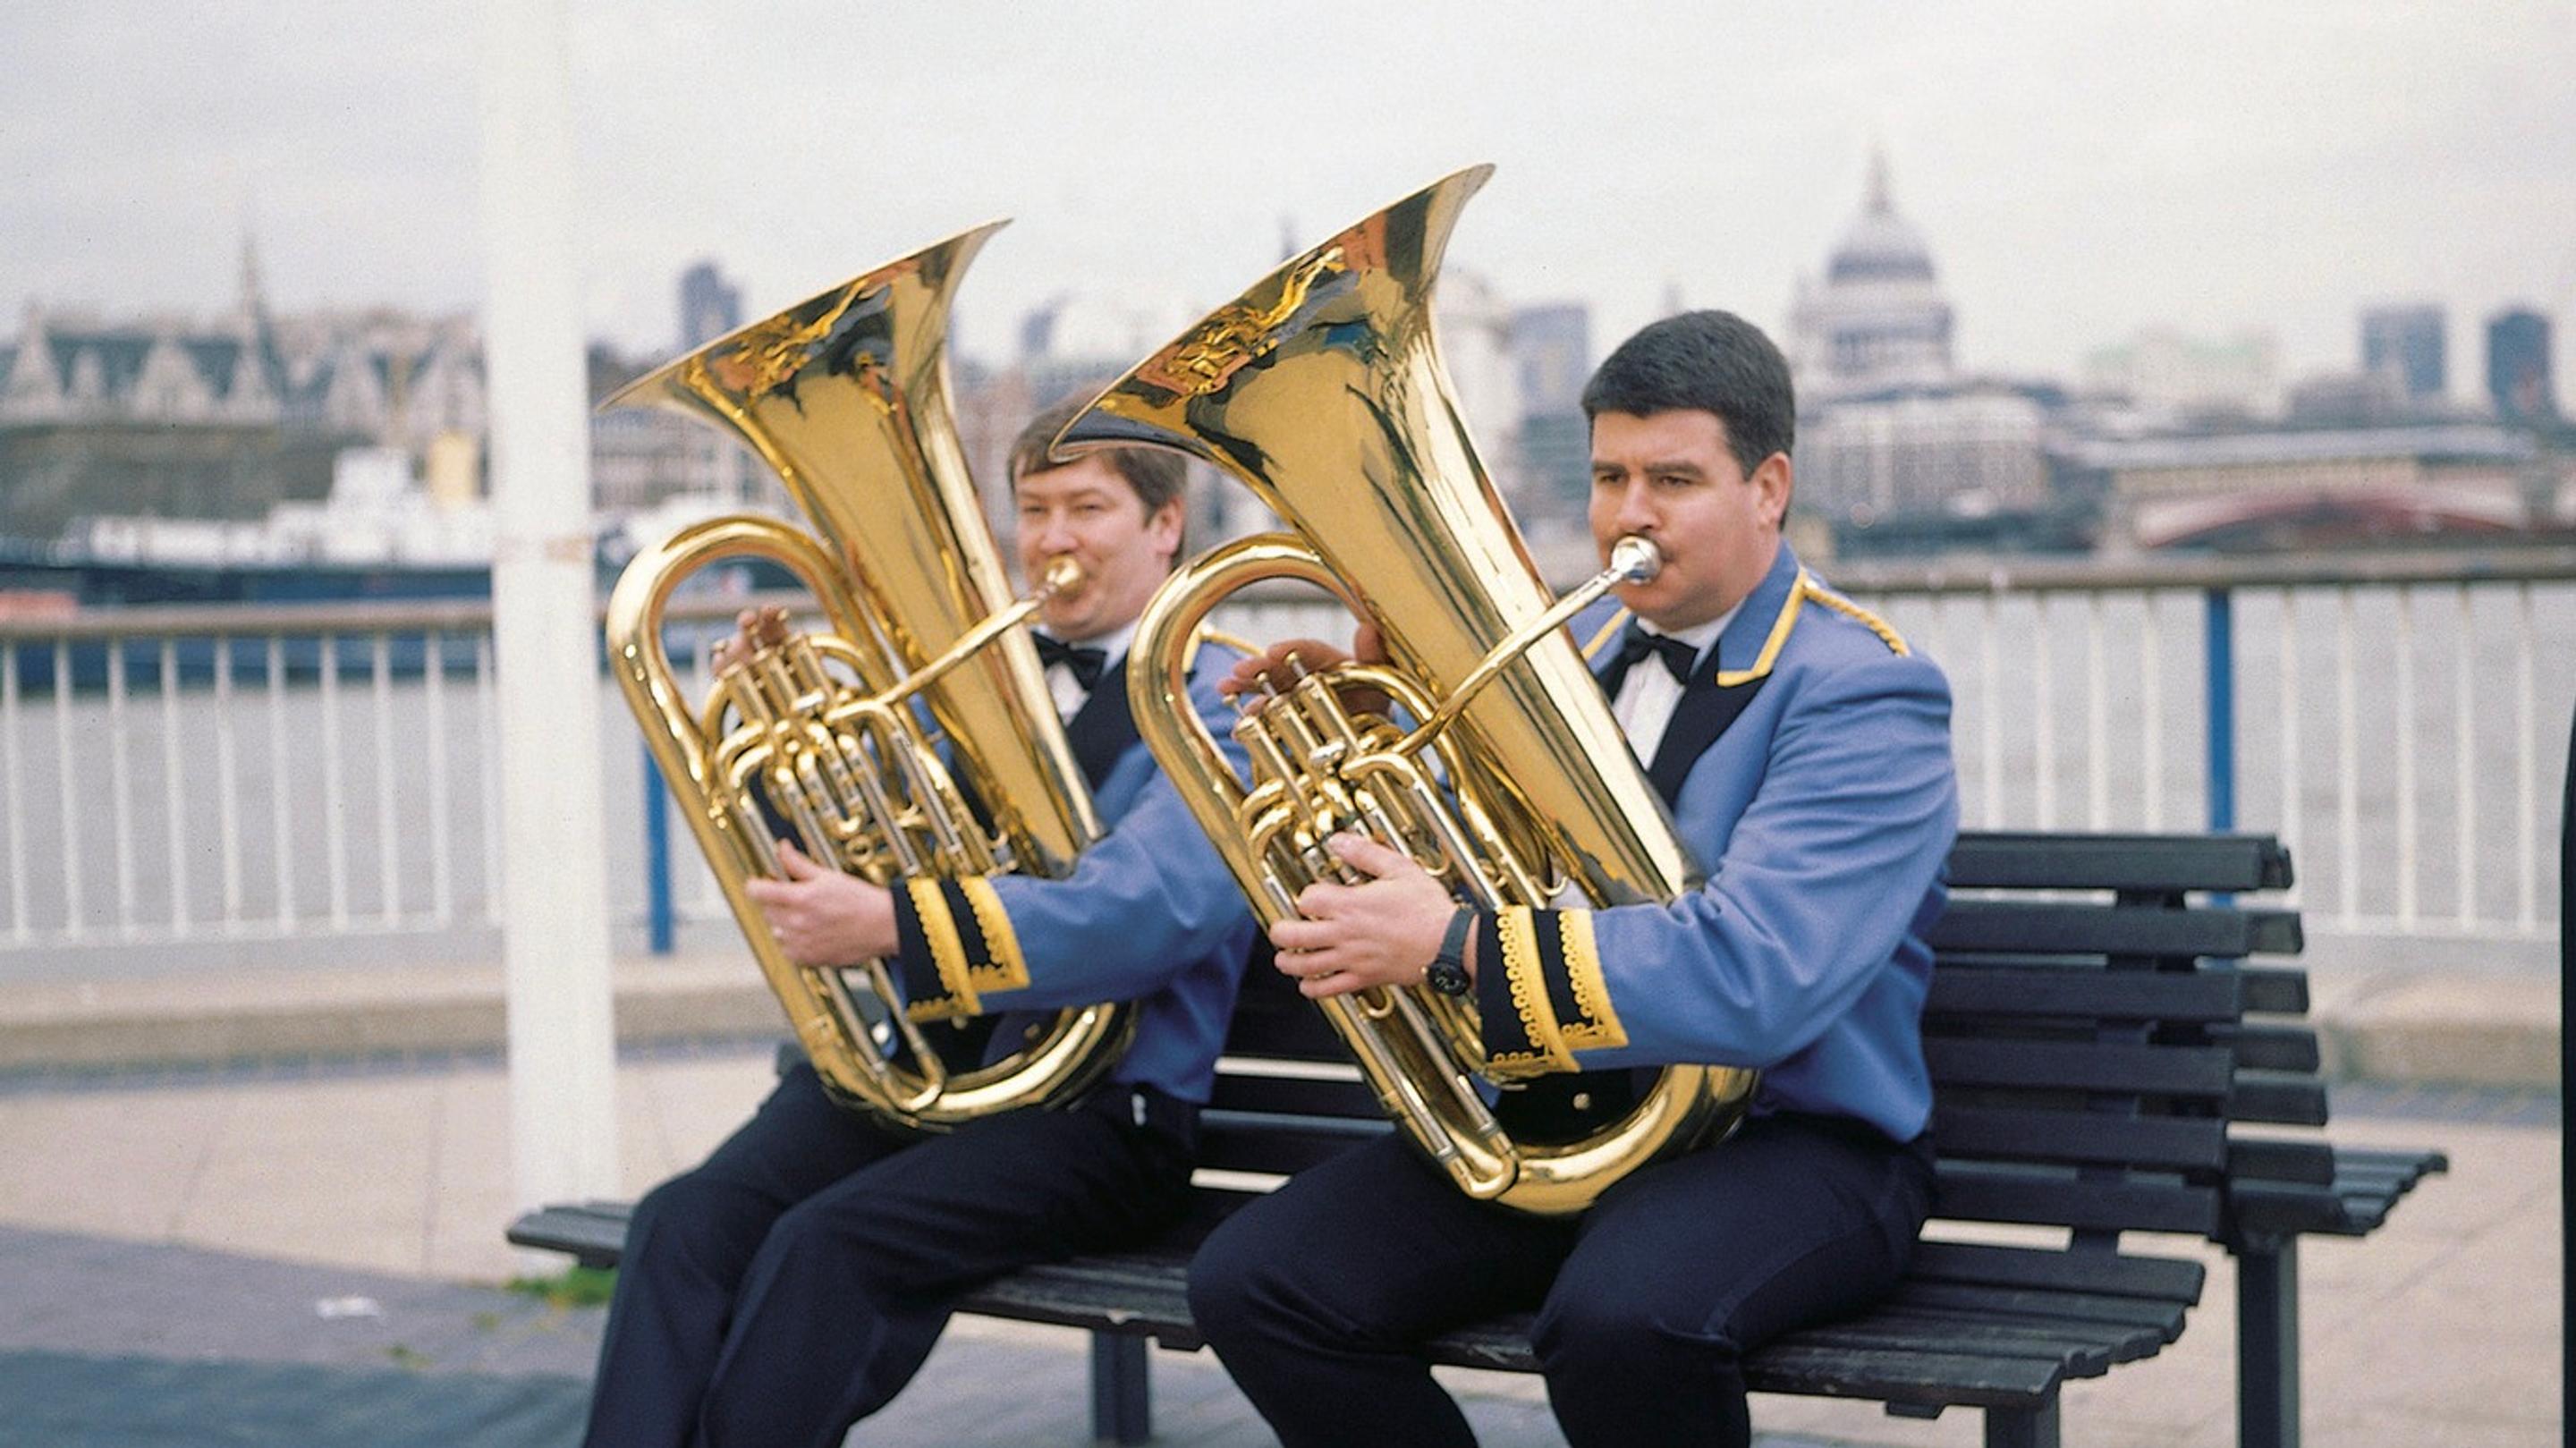 Two men in matching uniforms sit outside on a bench, each playing a tuba